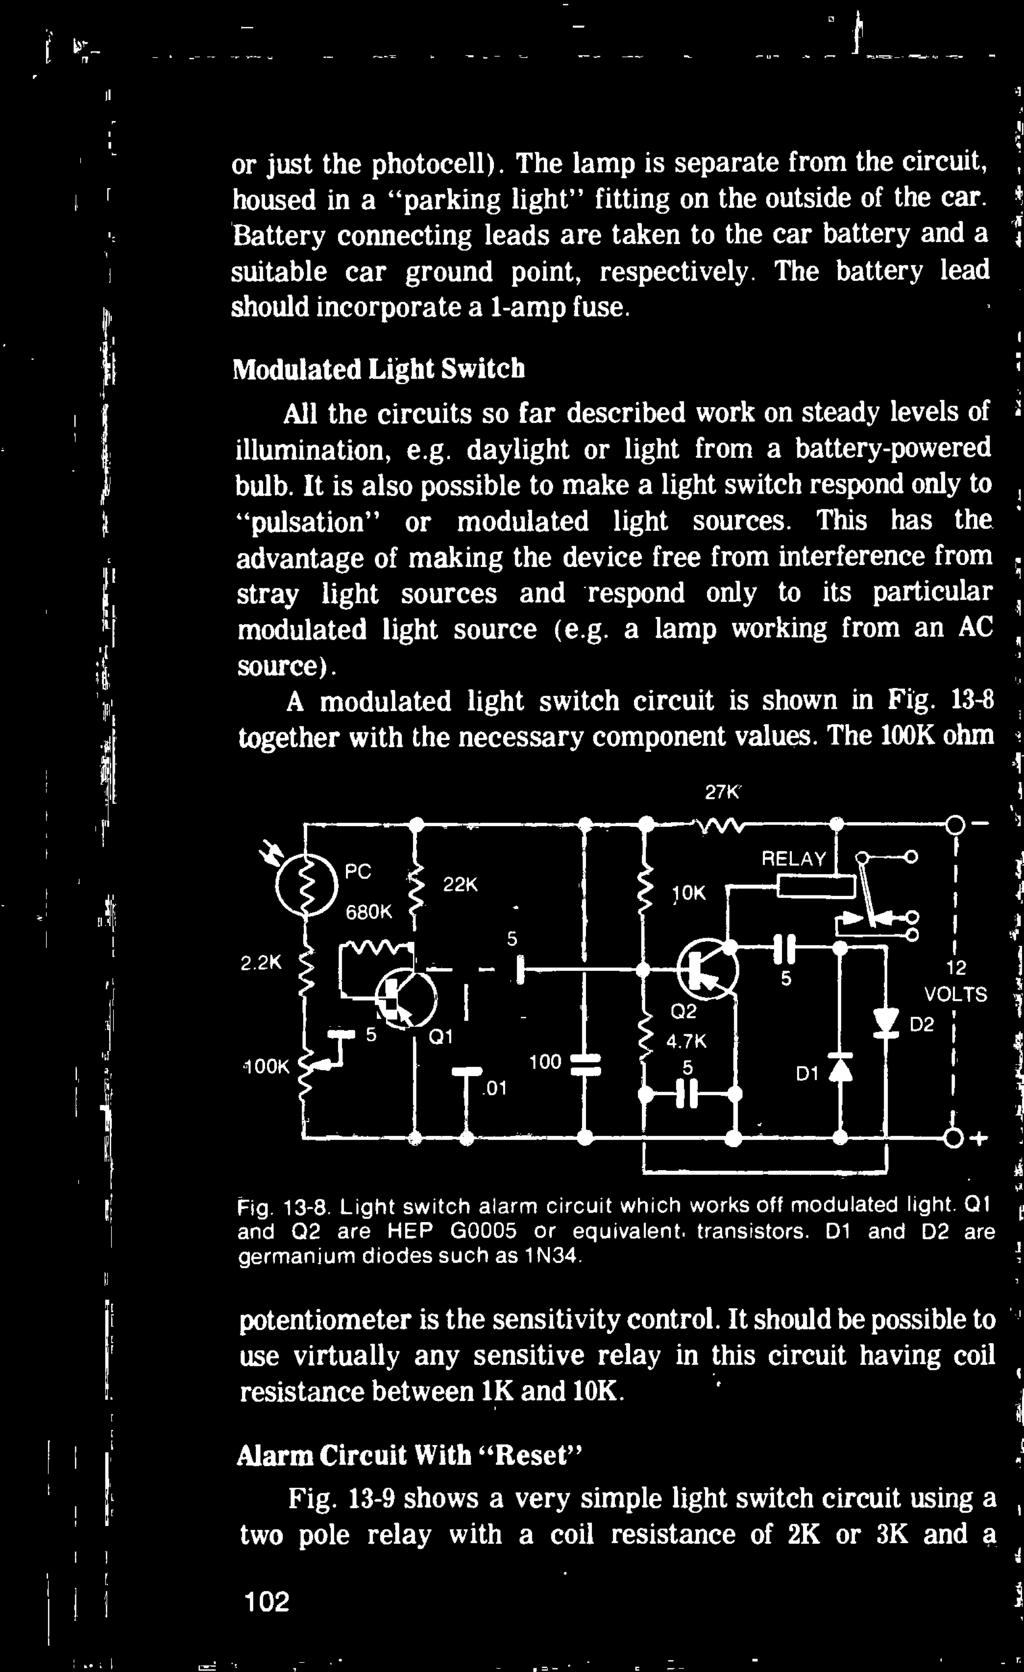 This has the advantage of making the device free from interference from stray light sources and respond only to its particular modulated light source (e.g. a lamp working from an AC source).